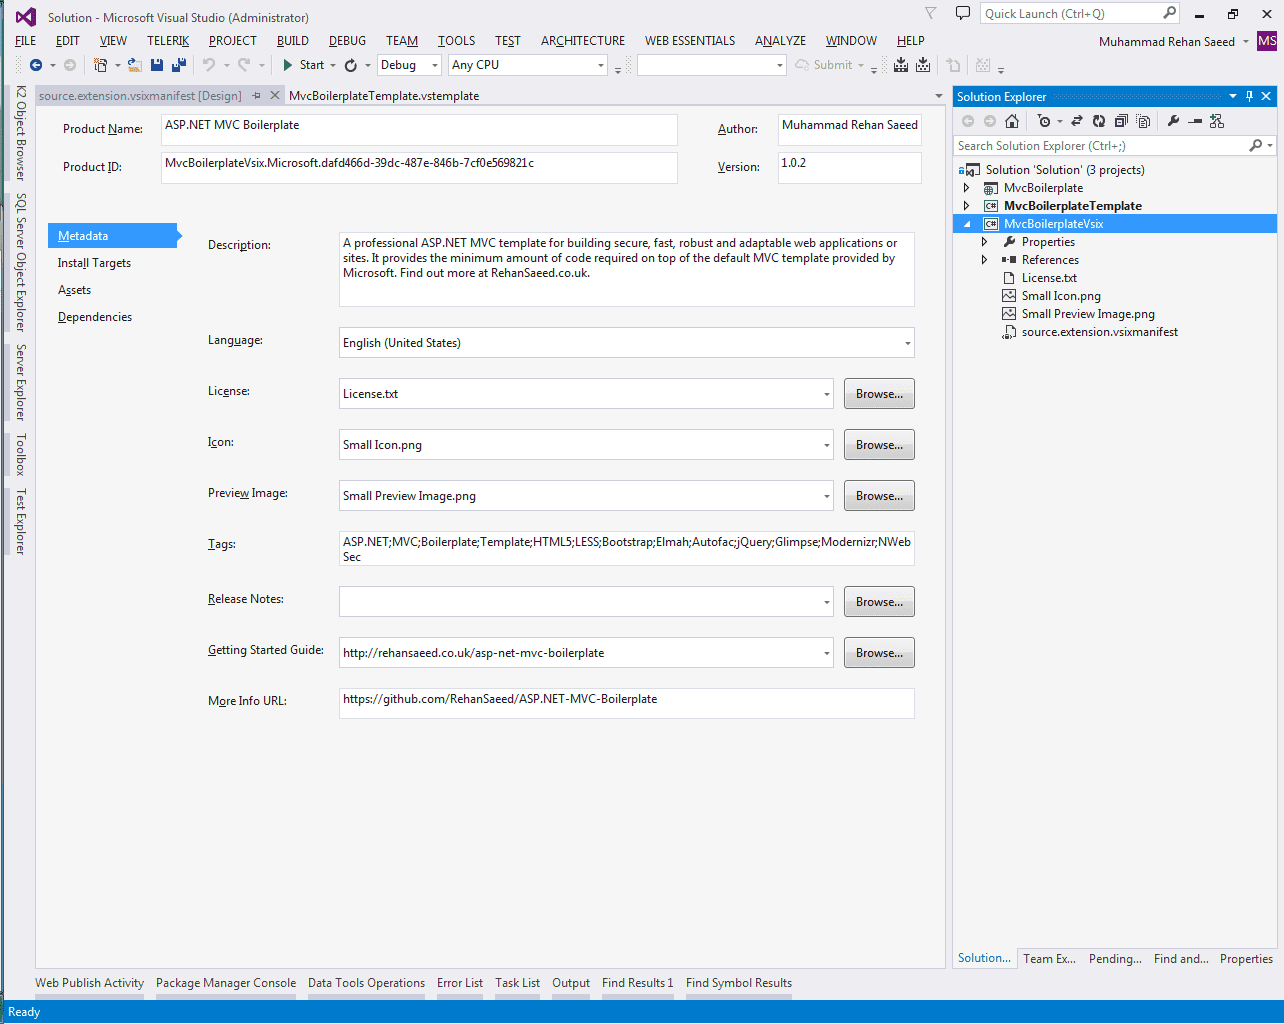 The metadata for the VSIX project, describing the .vsix installer file and also the project shown in the solution explorer, showing the files included.